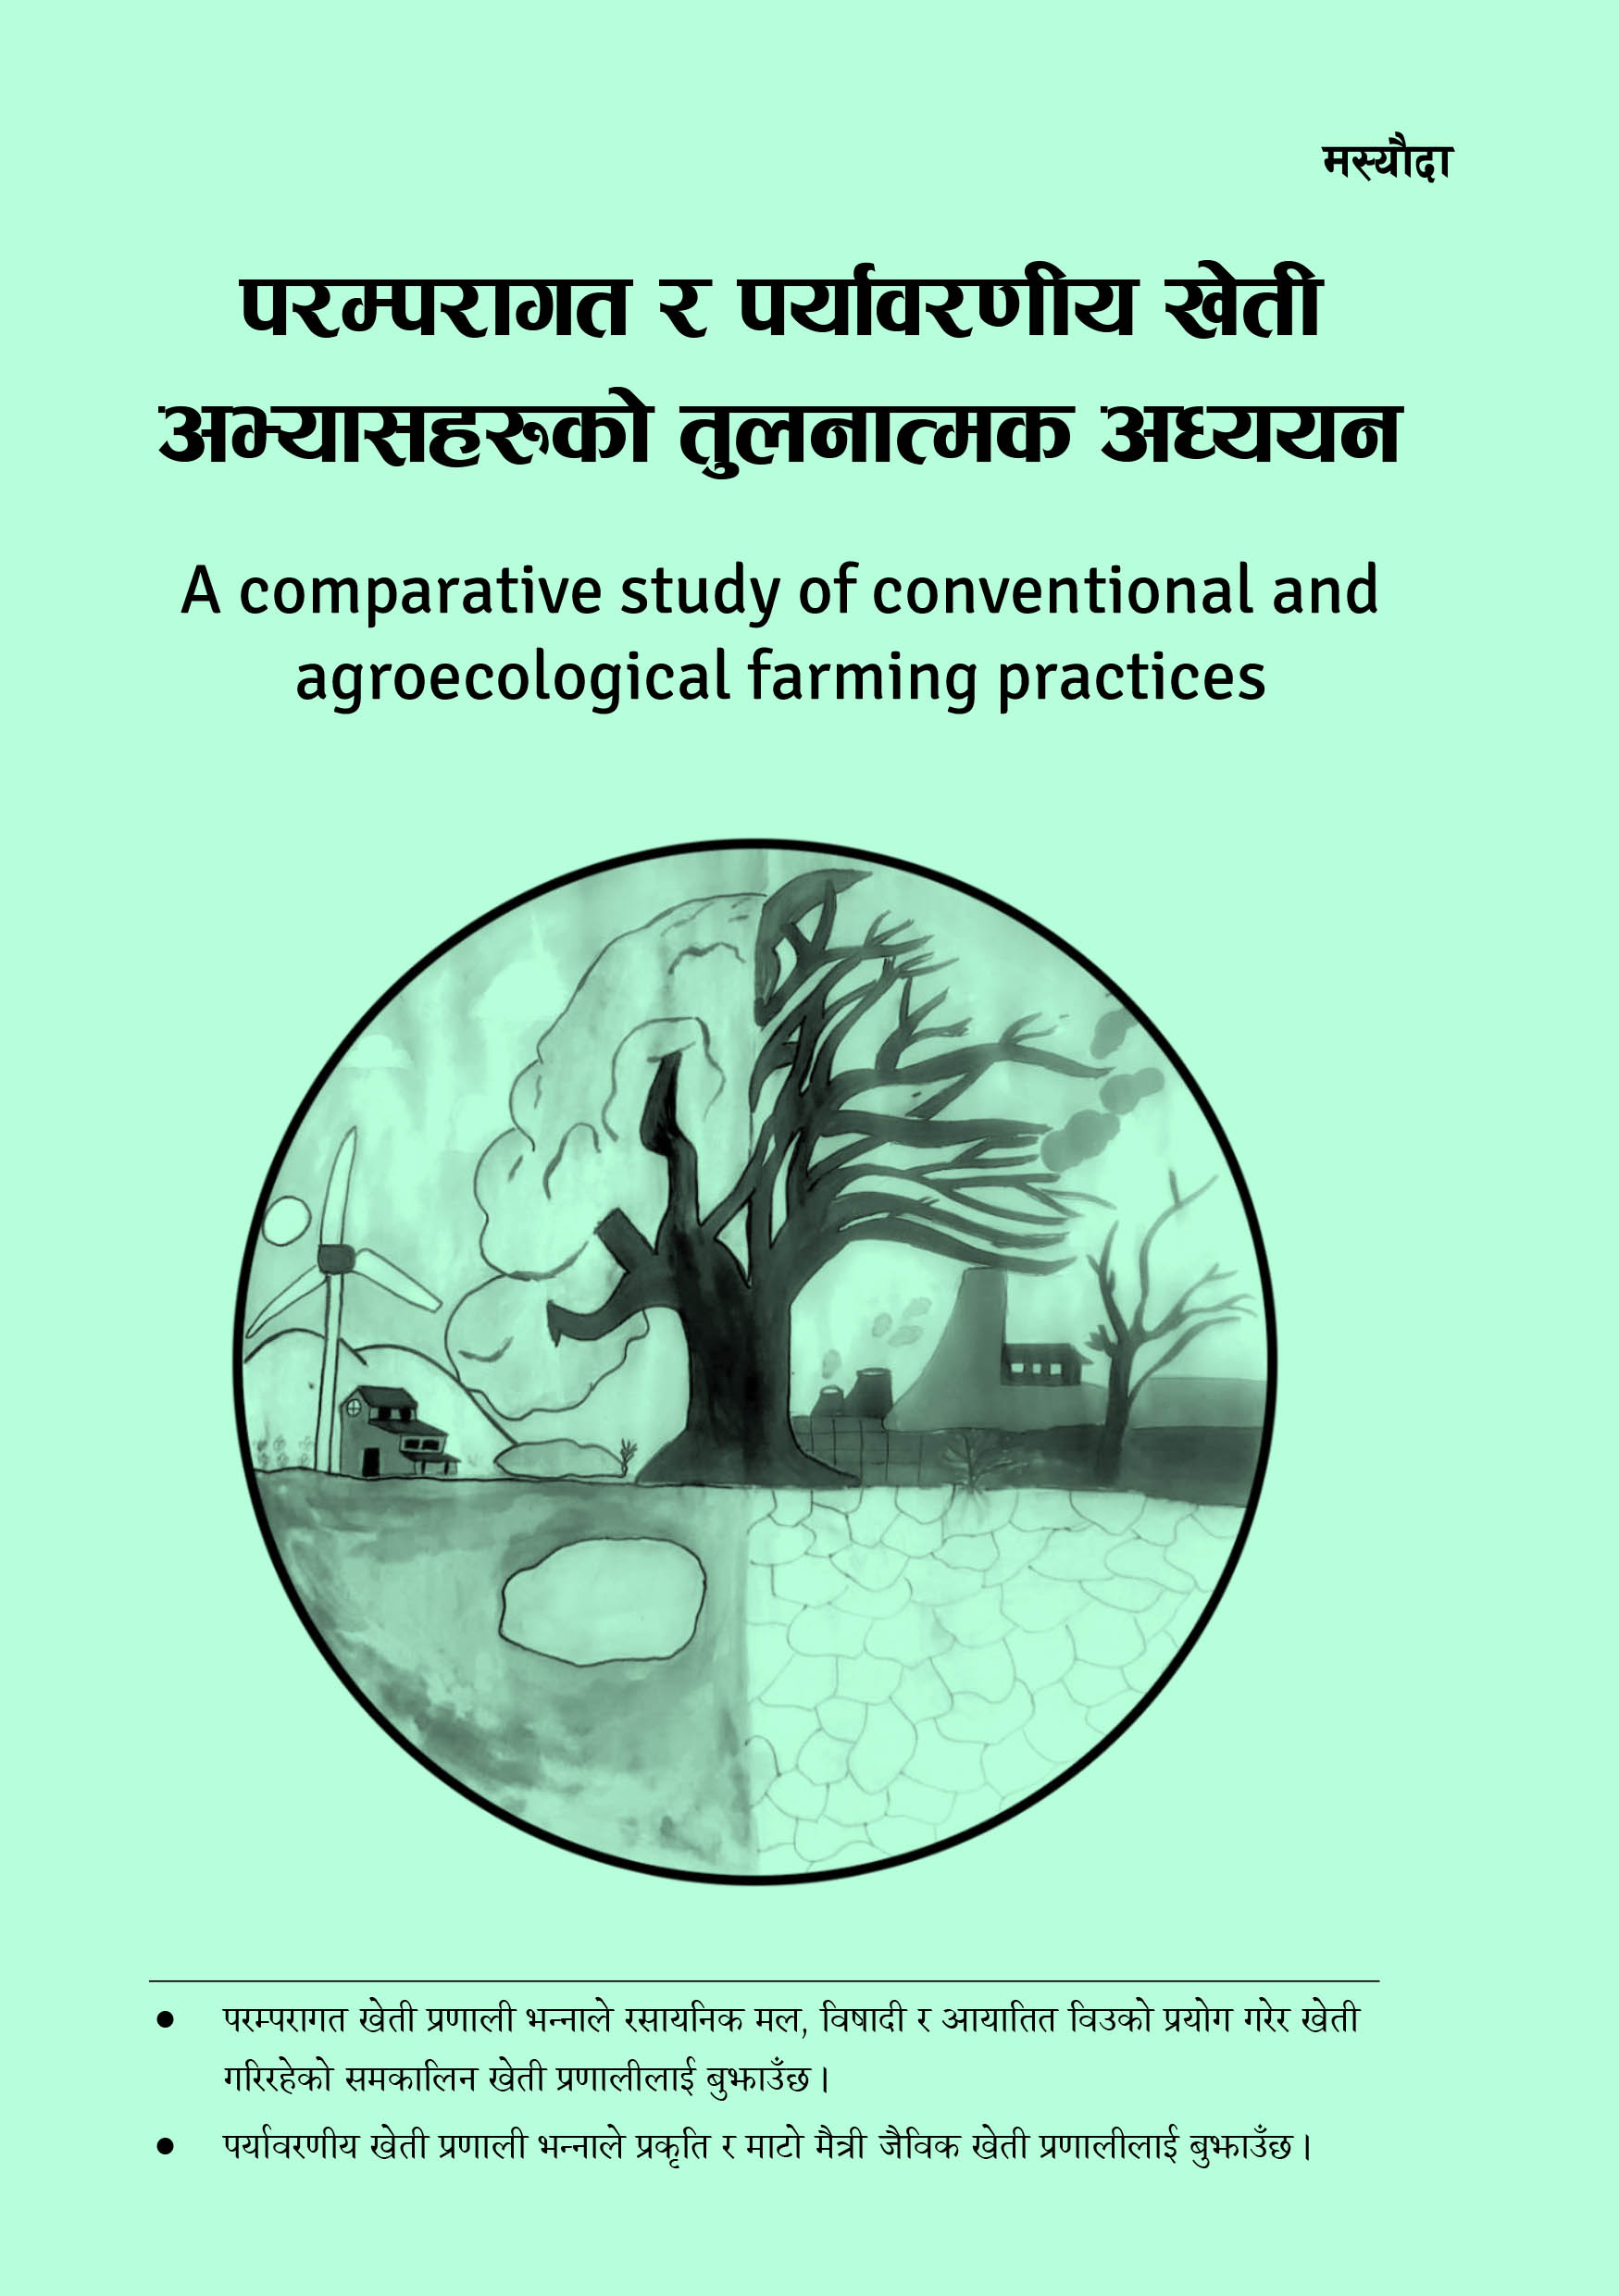 A comparative study of conventional and agroecological farming practices